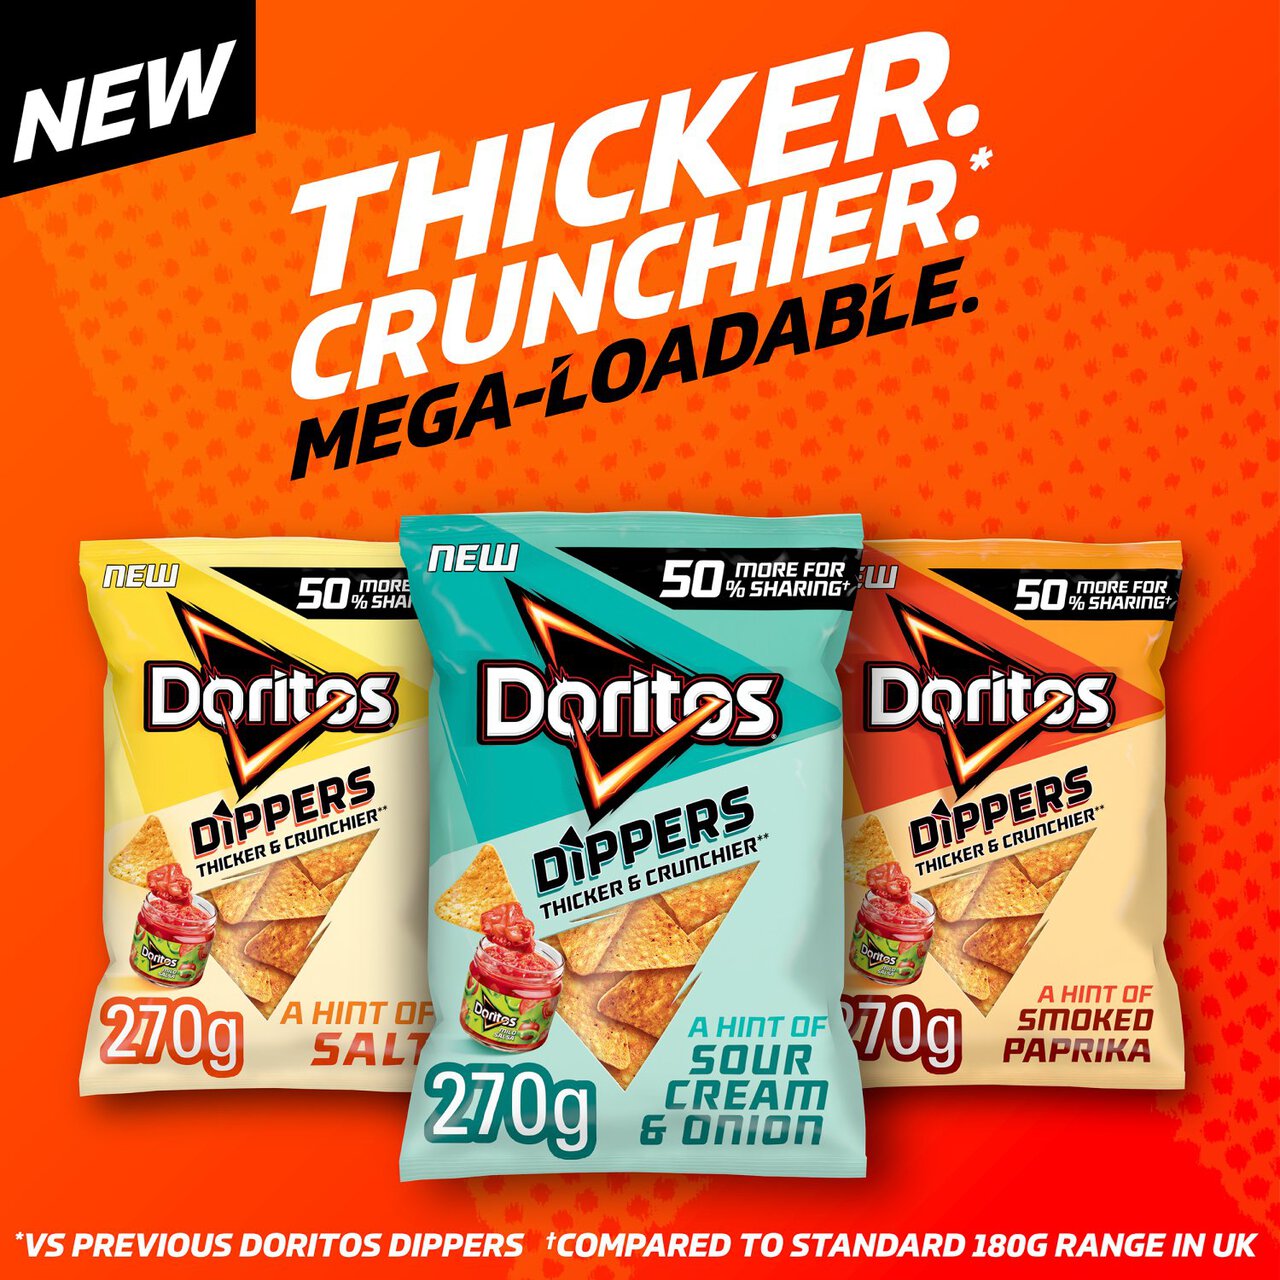 Doritos Dippers Hint of Sour Cream & Onion Sharing Tortilla Chips 270g